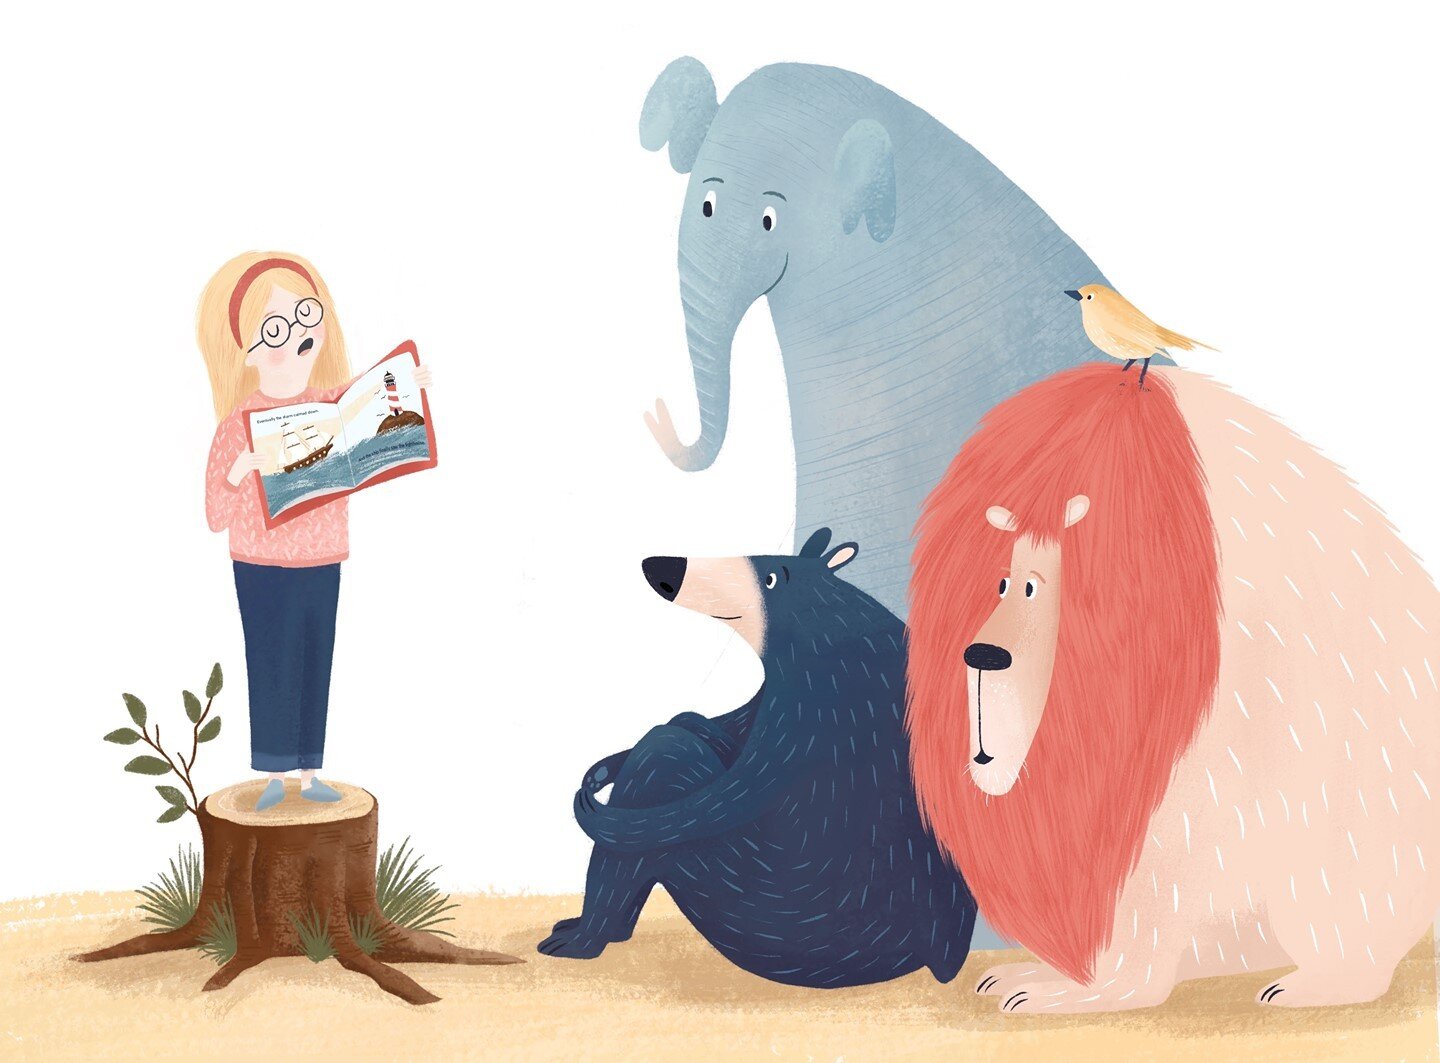 Storytime! ❤️ What are your favorite picture books from childhood (or now!)? ⁠
.⁠
.⁠
.⁠
.⁠
.⁠
.⁠
.⁠
.⁠
.⁠
.⁠
#childrenswriterguild #kidsbookillustrator #illustrationsforchildren #illustrationsforkids #kidsbookillustration #kidillustrations #cuteanima